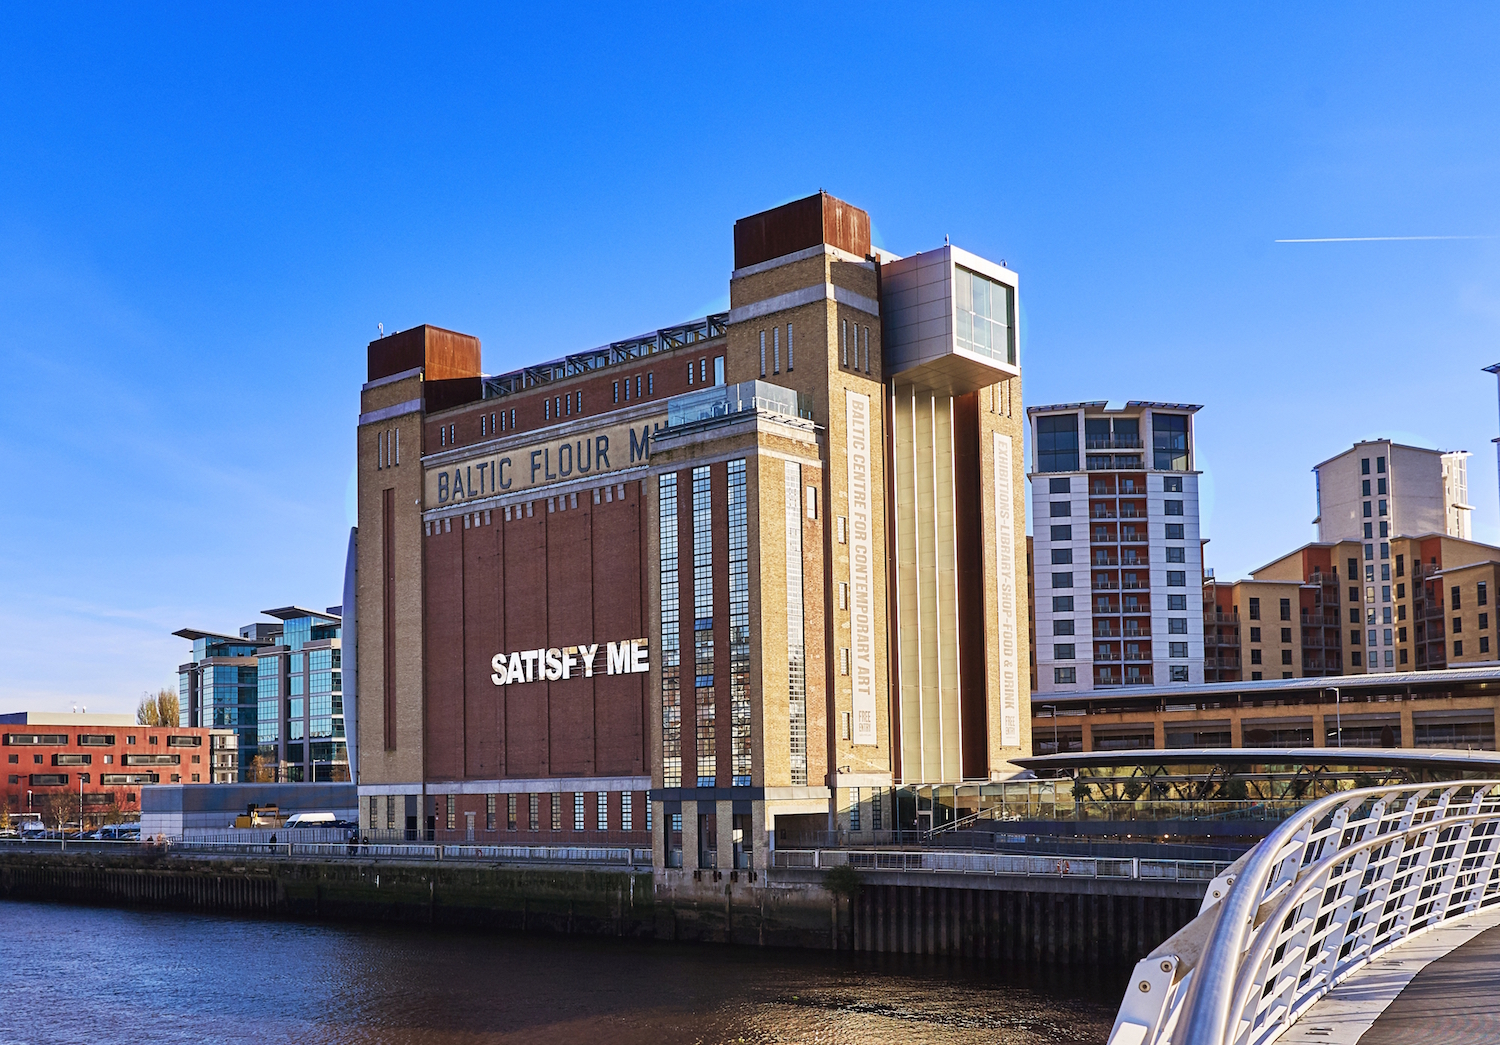 BALTIC Centre for Contemporary Art building, with the words 'SATISFY ME' across the front of the brick facade.